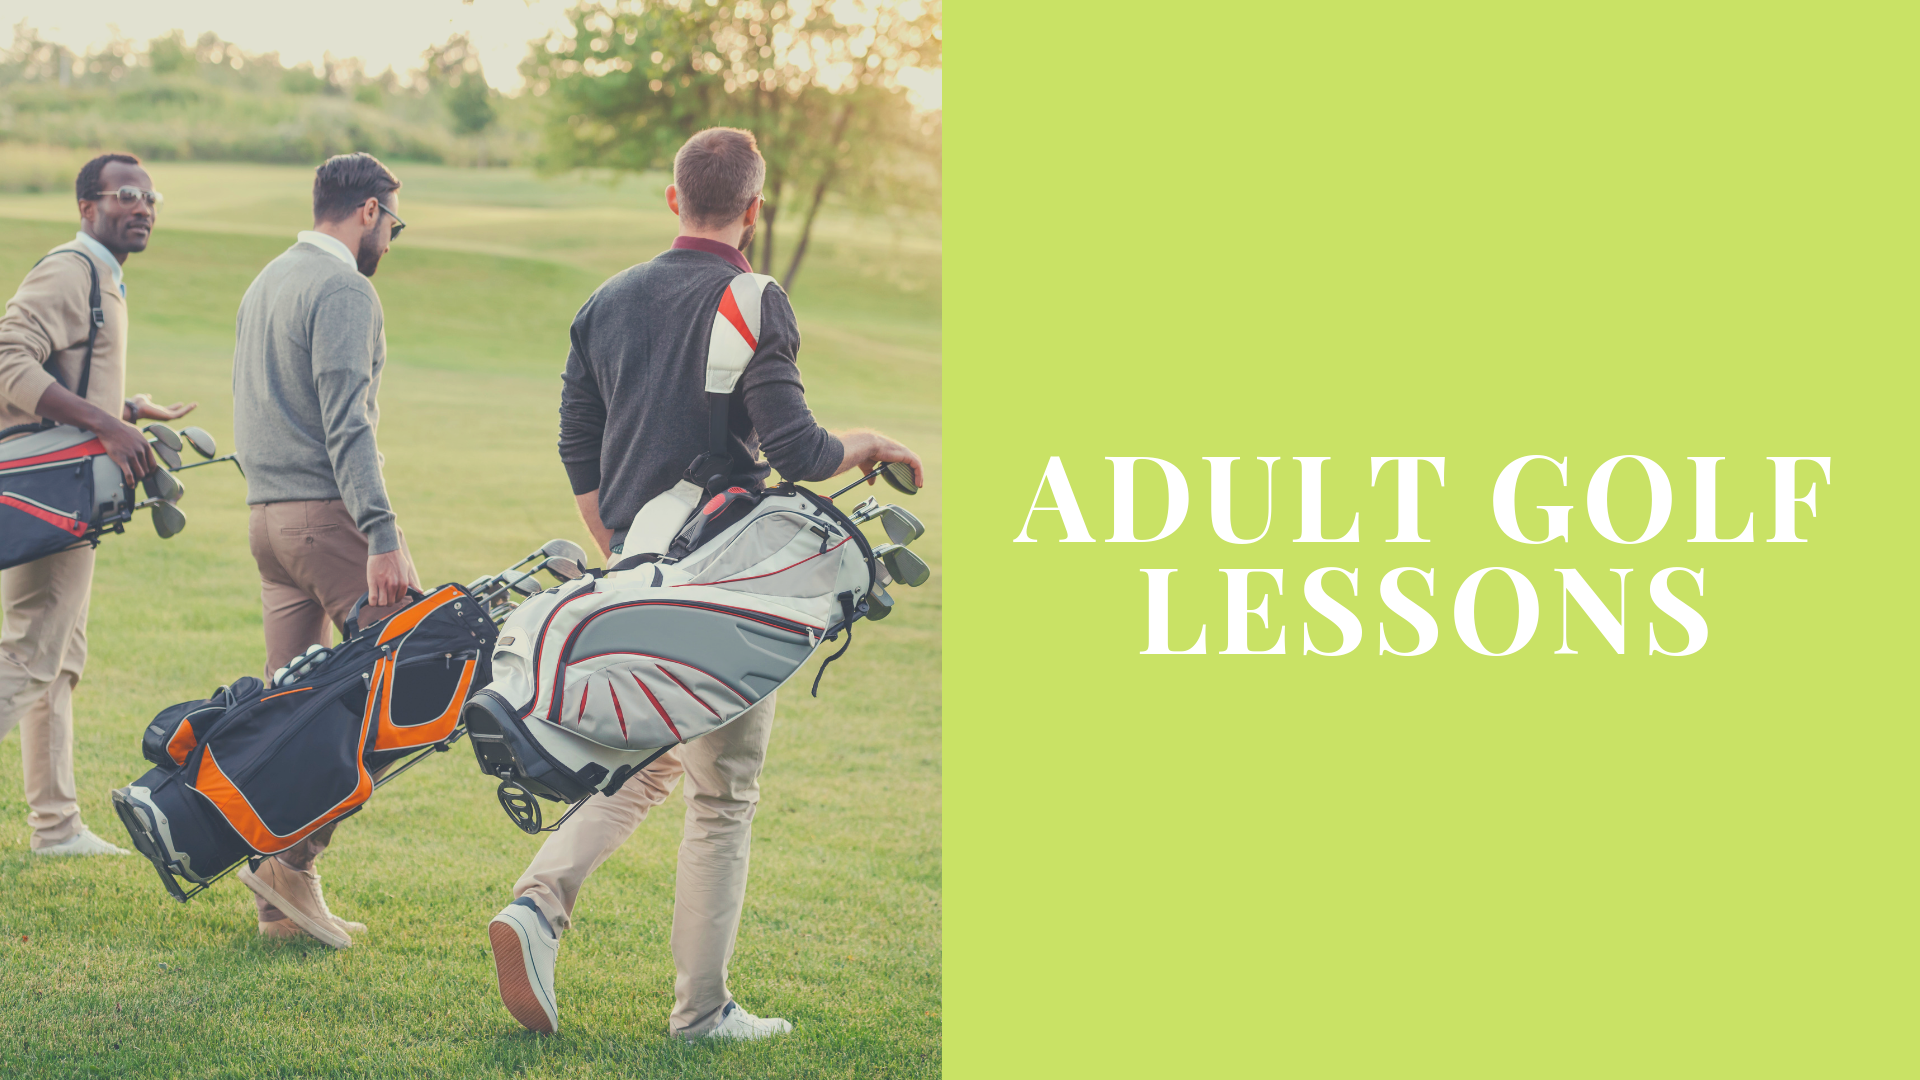 Adult Golf Lessons - River Oaks Golf Course - Cottage Grove